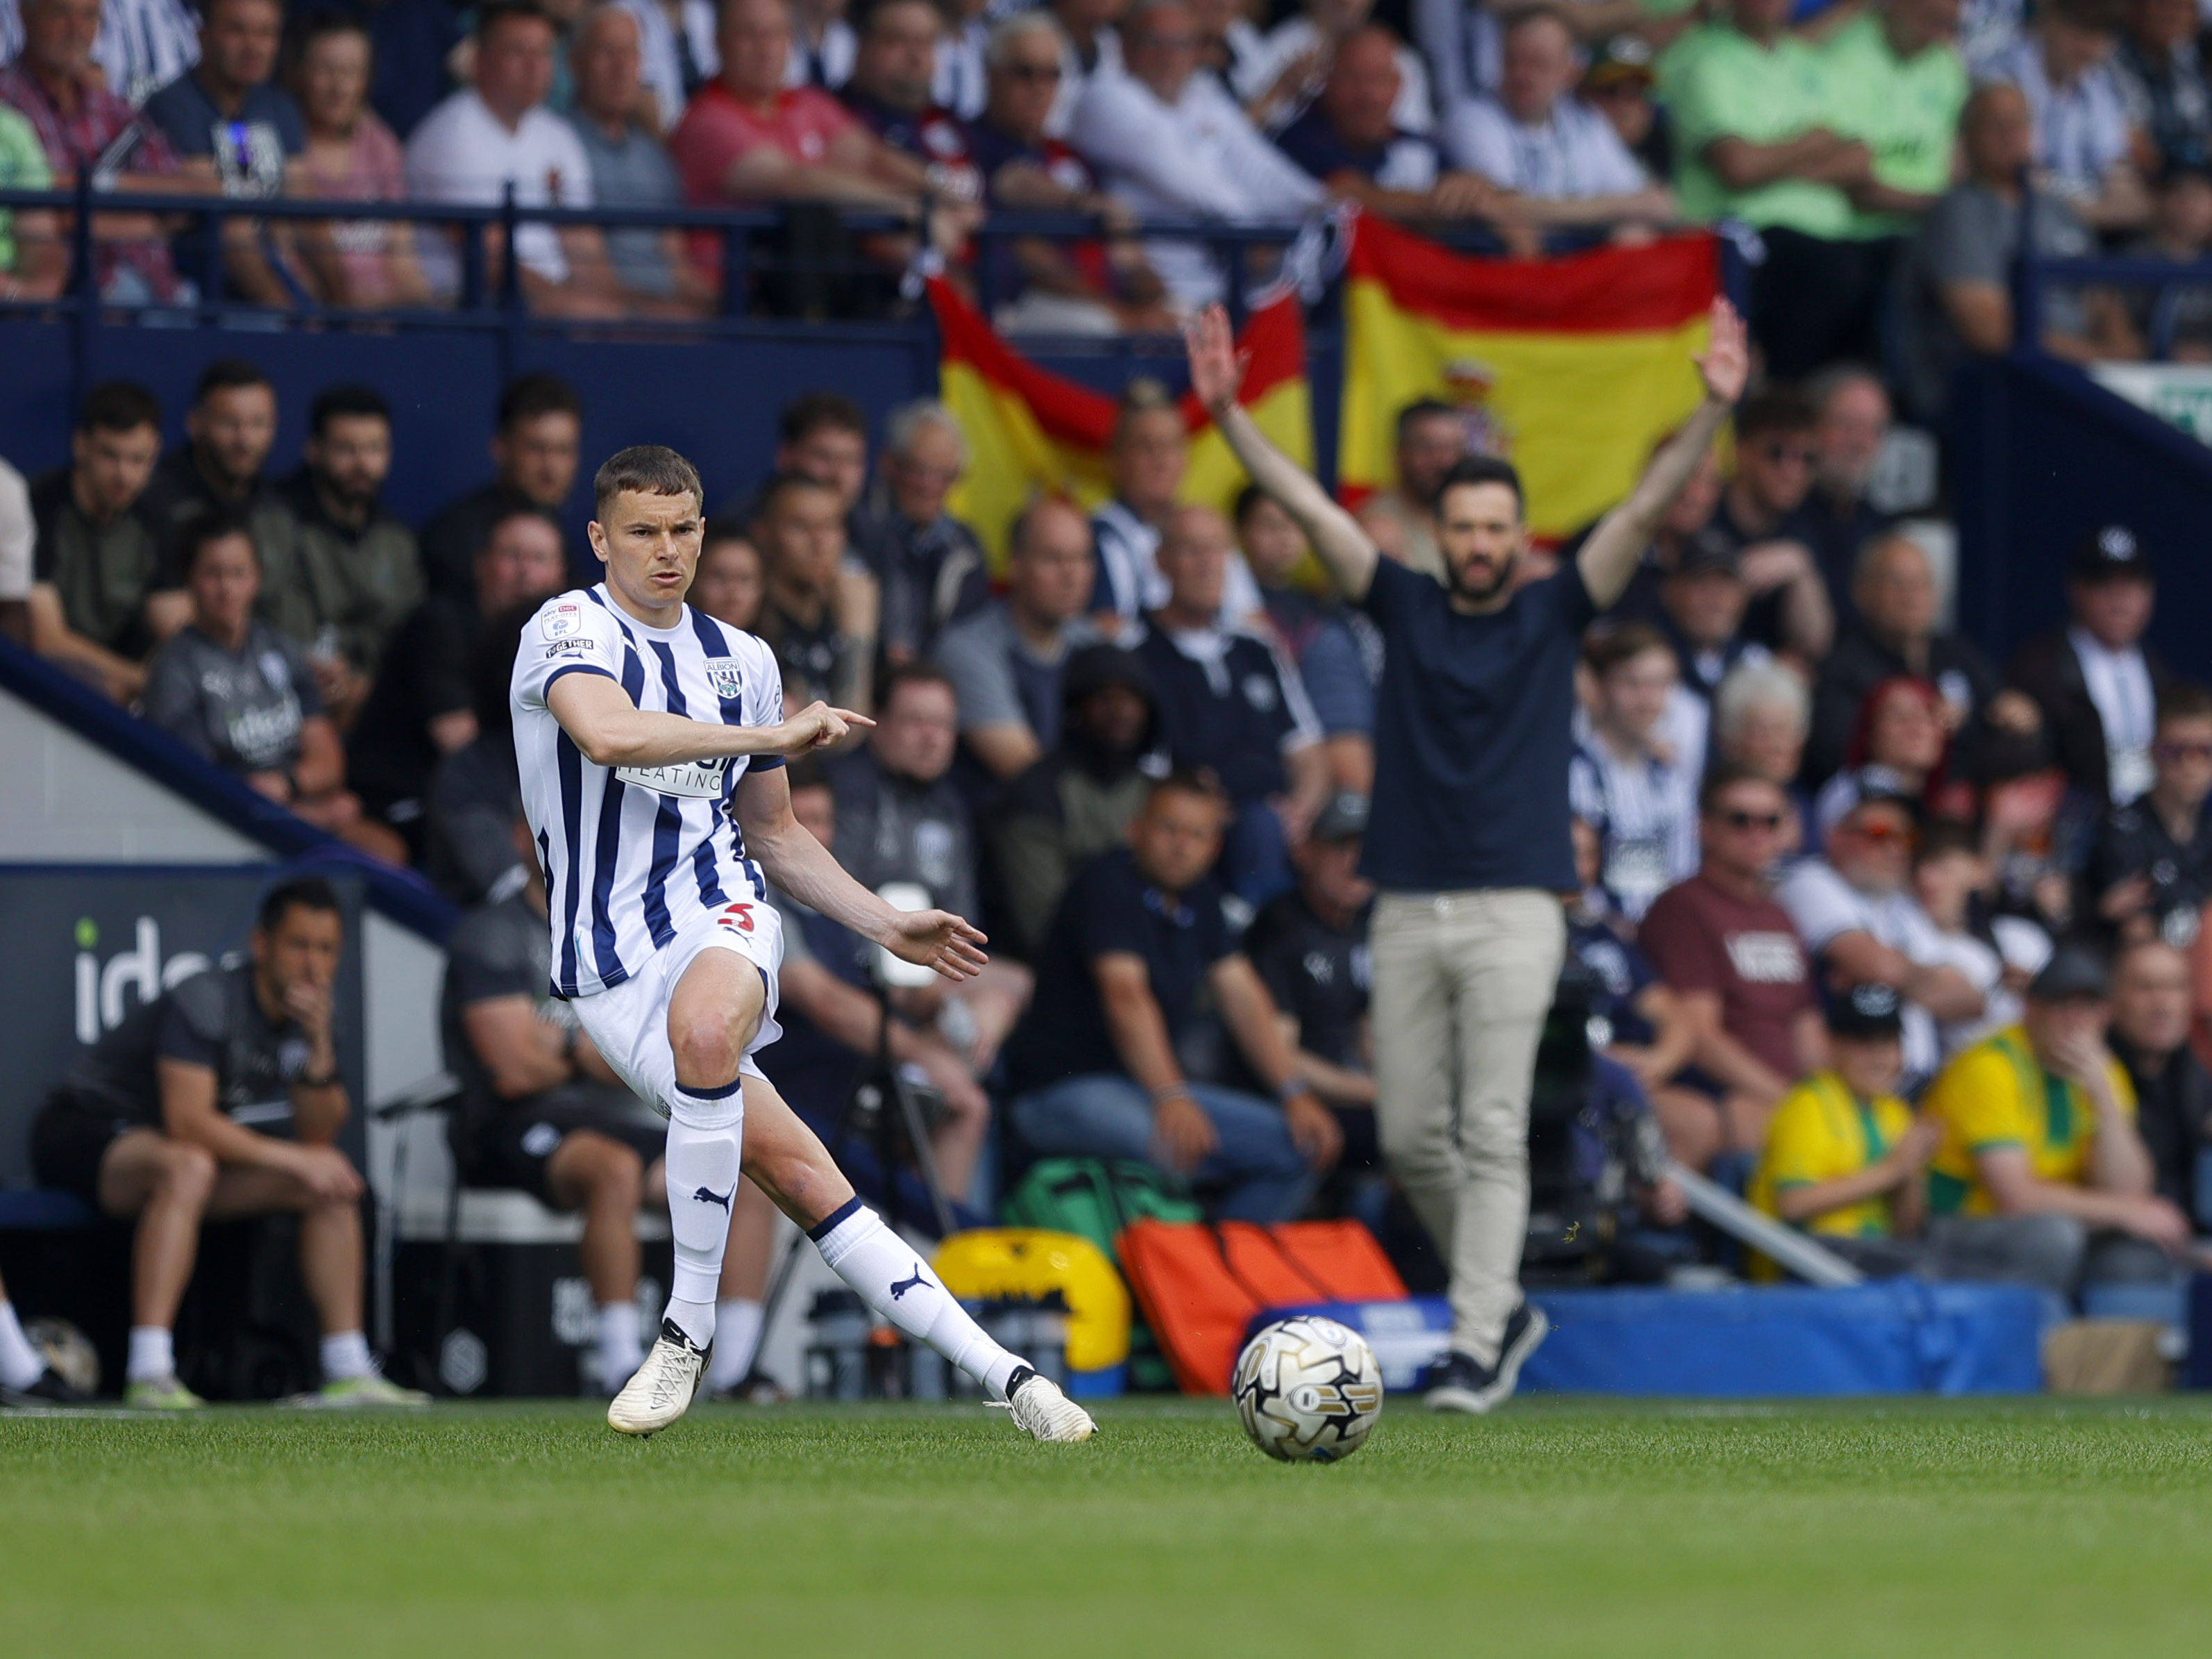 An image of Conor Townsend passing the ball against Southampton, with Carlos Corberan in the background